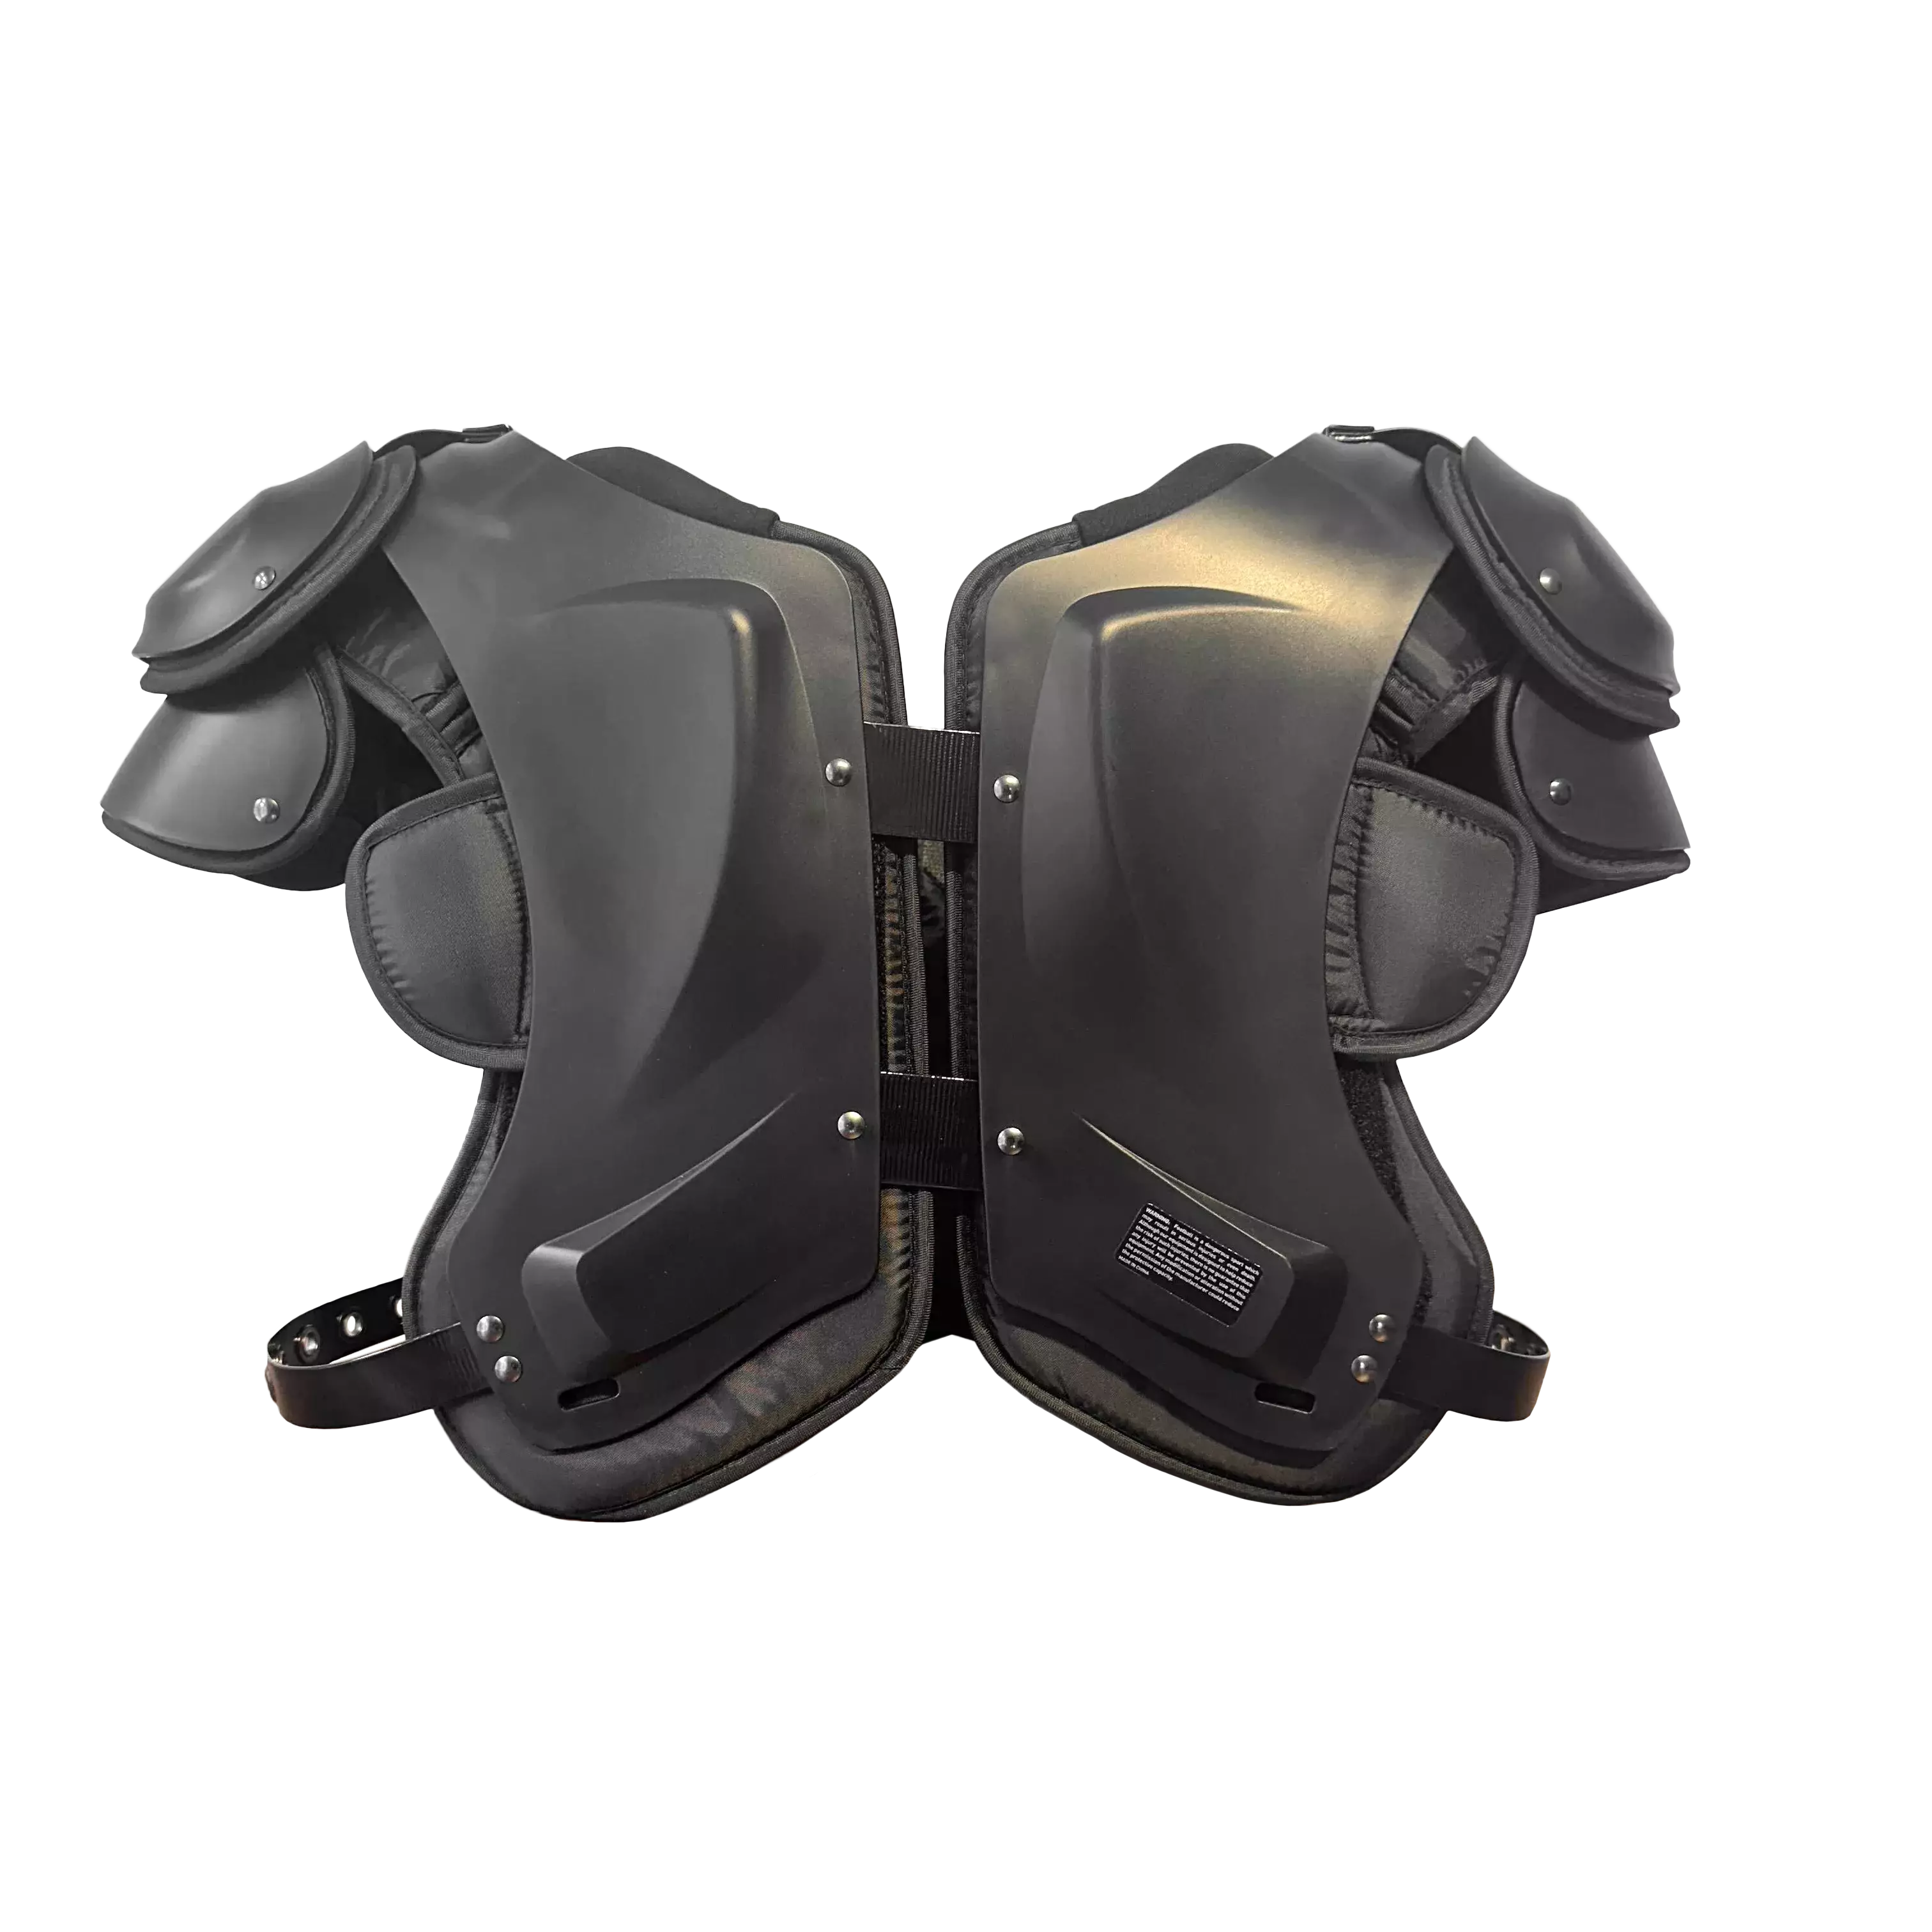 Backside view of Velocity 2 football shoulder pads.